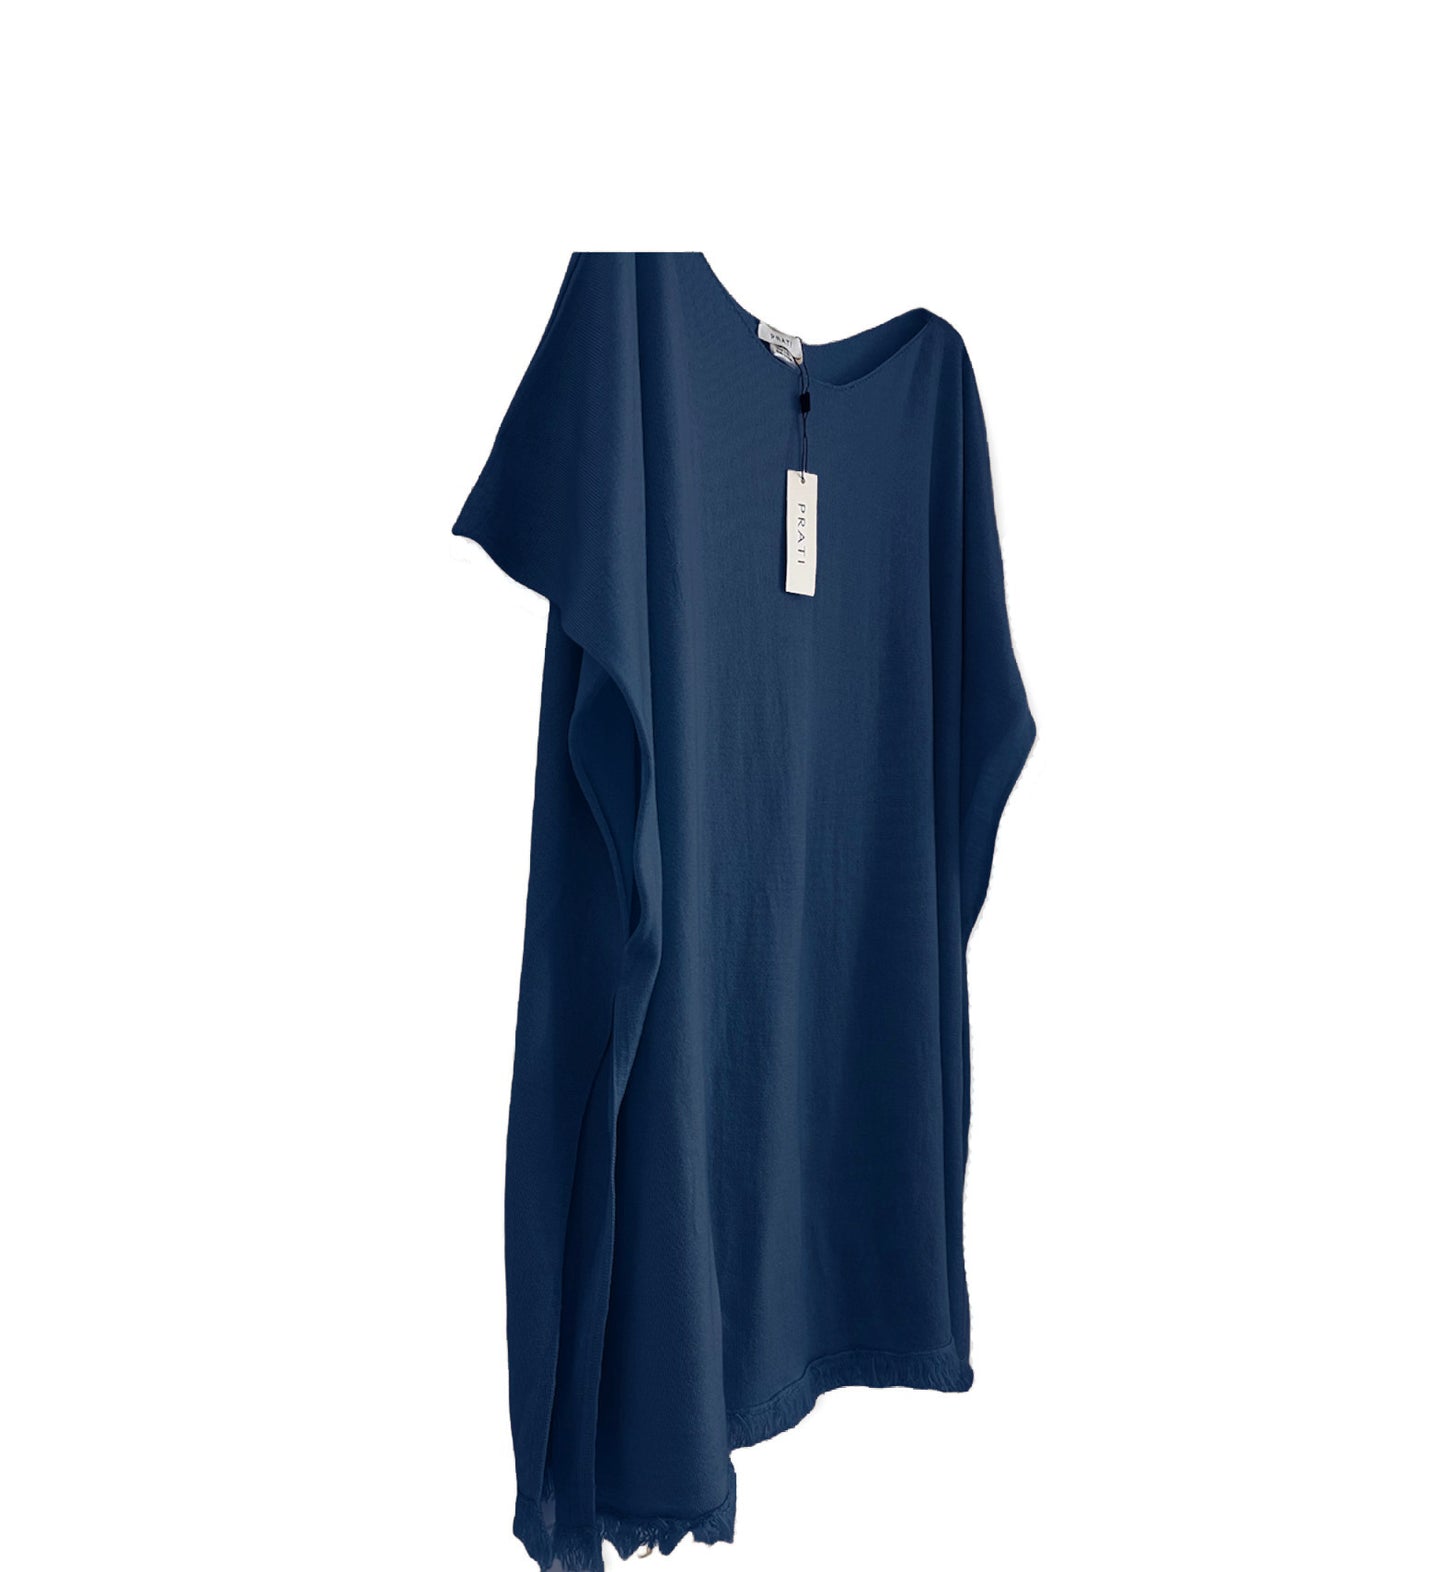 Resort cashmere Silk poncho cover up fringes navy